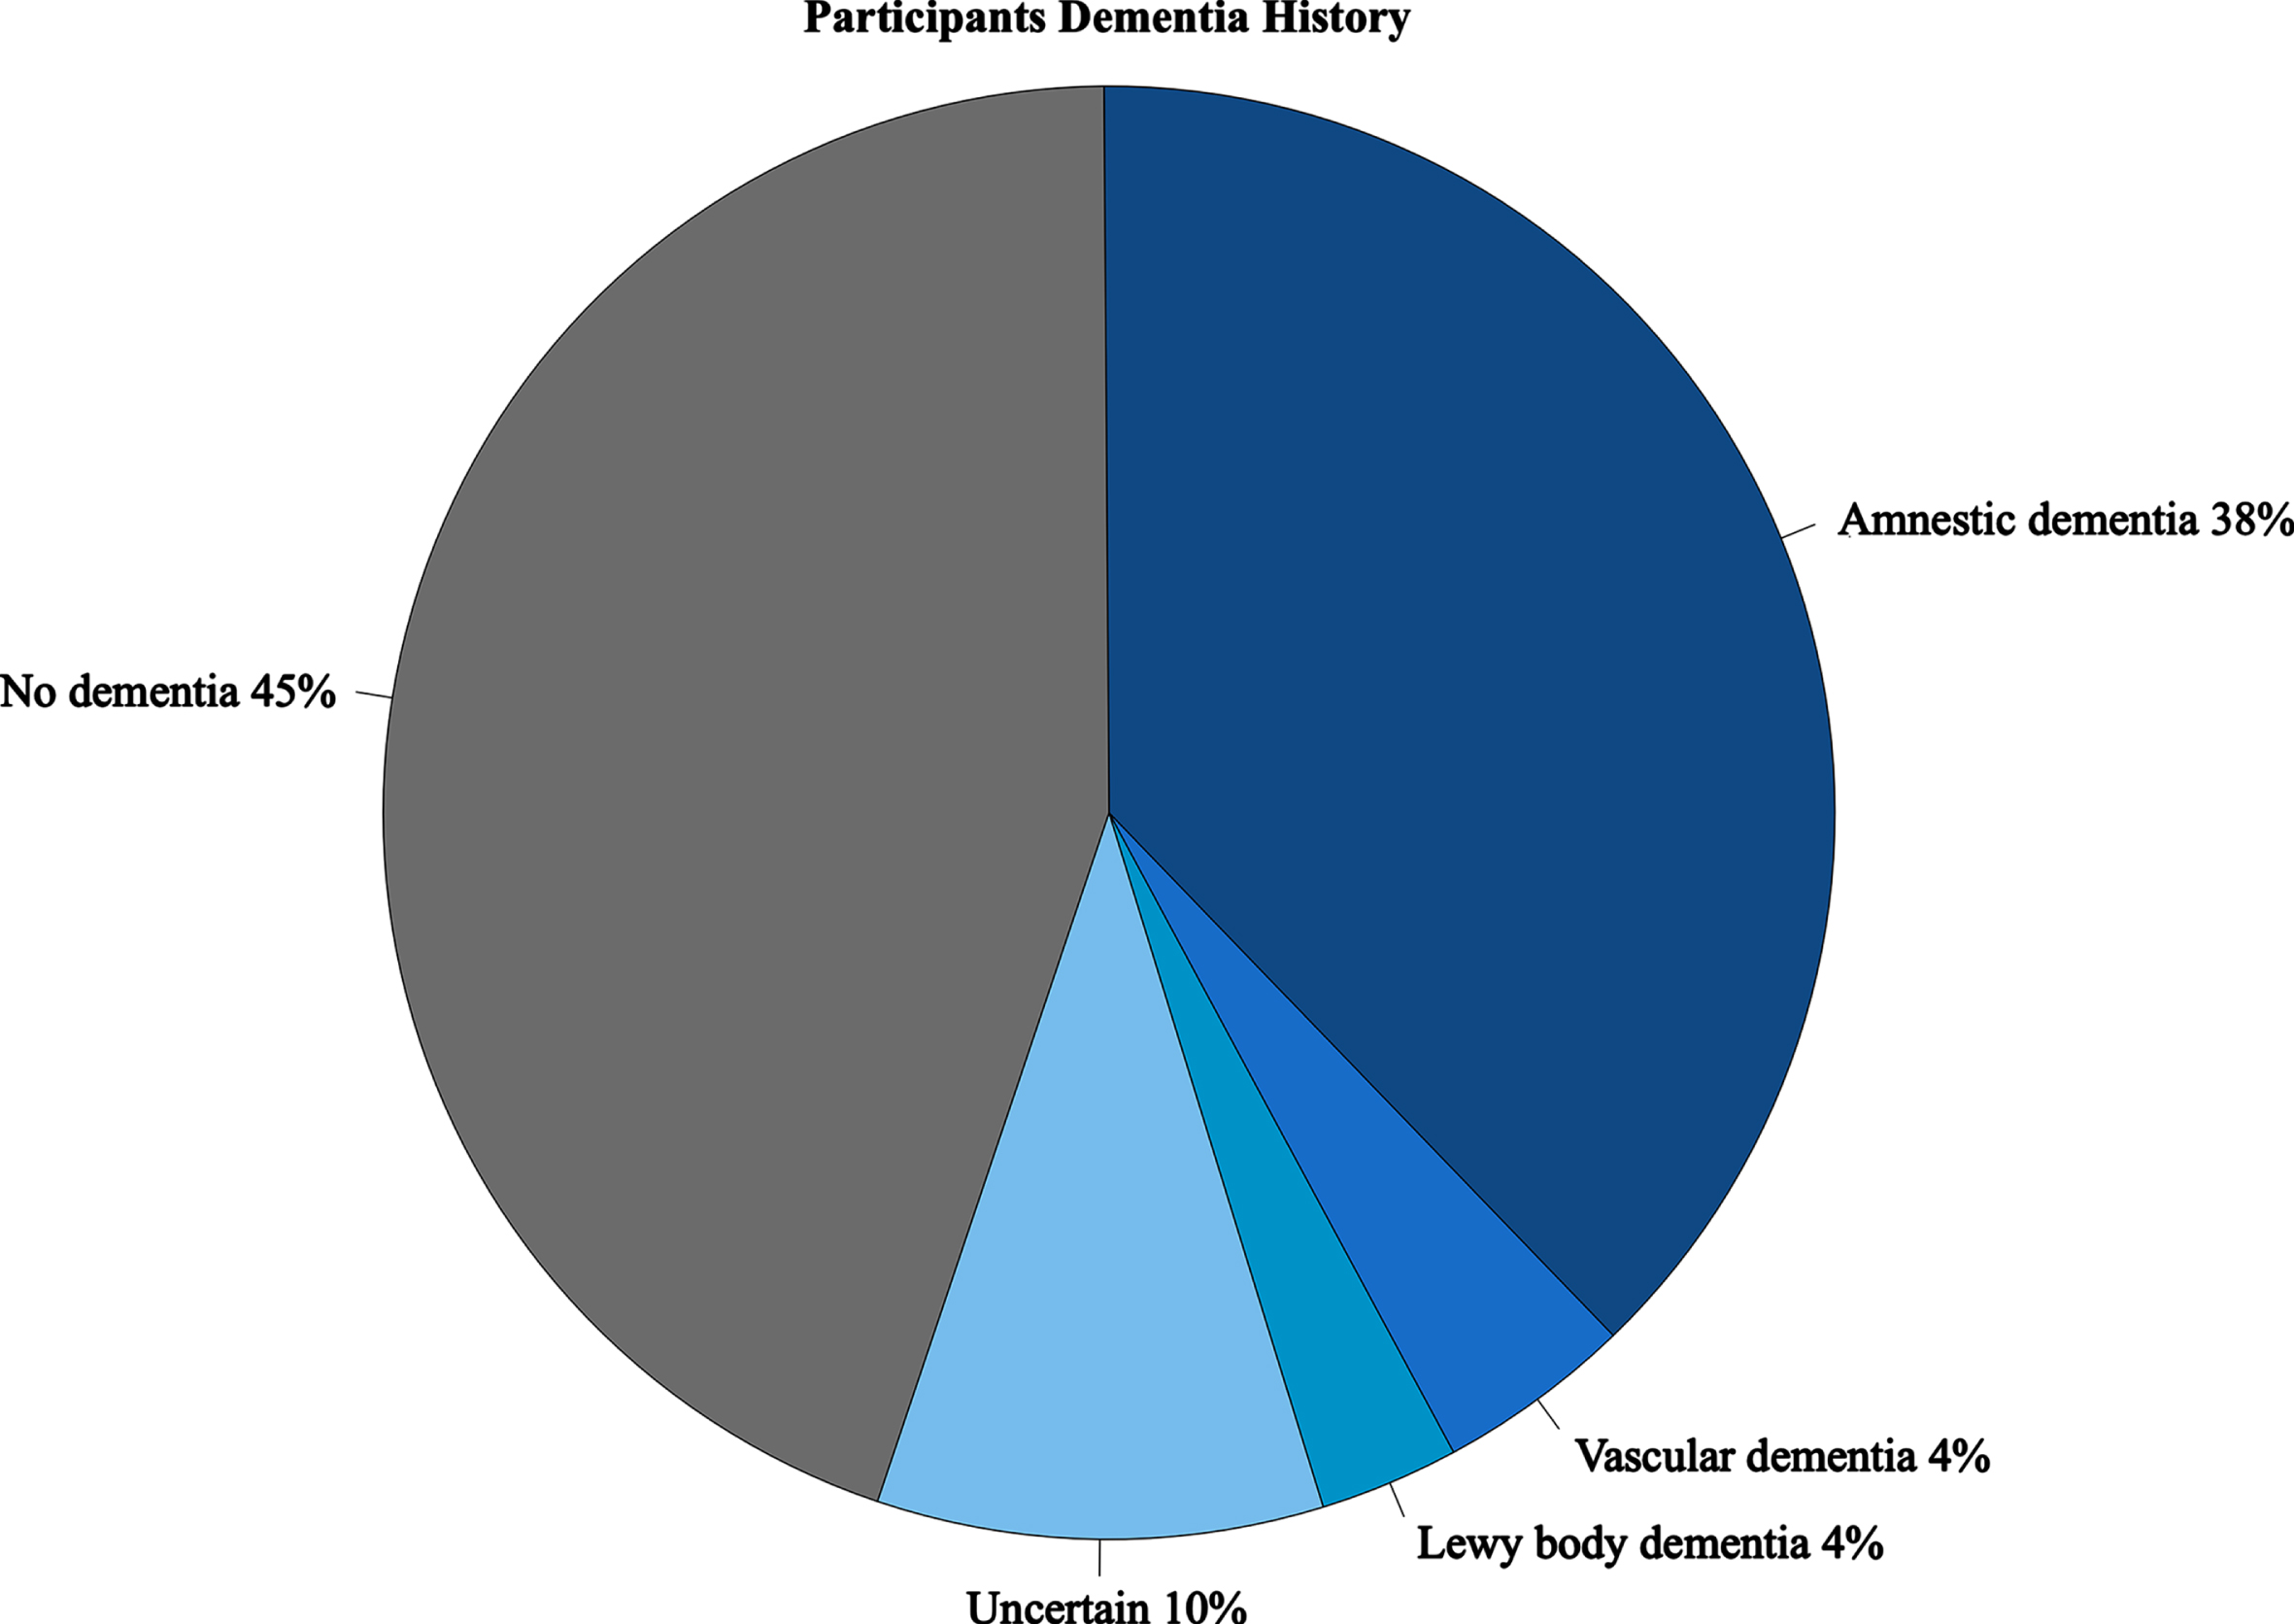 Participant Dementia History. Presence of dementia based on consensus diagnoses classified as No dementia (cognitively normal or having mild cognitive impairment with no evidence of dementia on medical records≤3 years prior to date of death), amnestic, Lewy body dementia (Parkinson’s disease dementia and dementia with Lewy bodies), and uncertain (dementia type could not be ascribed to known forms).